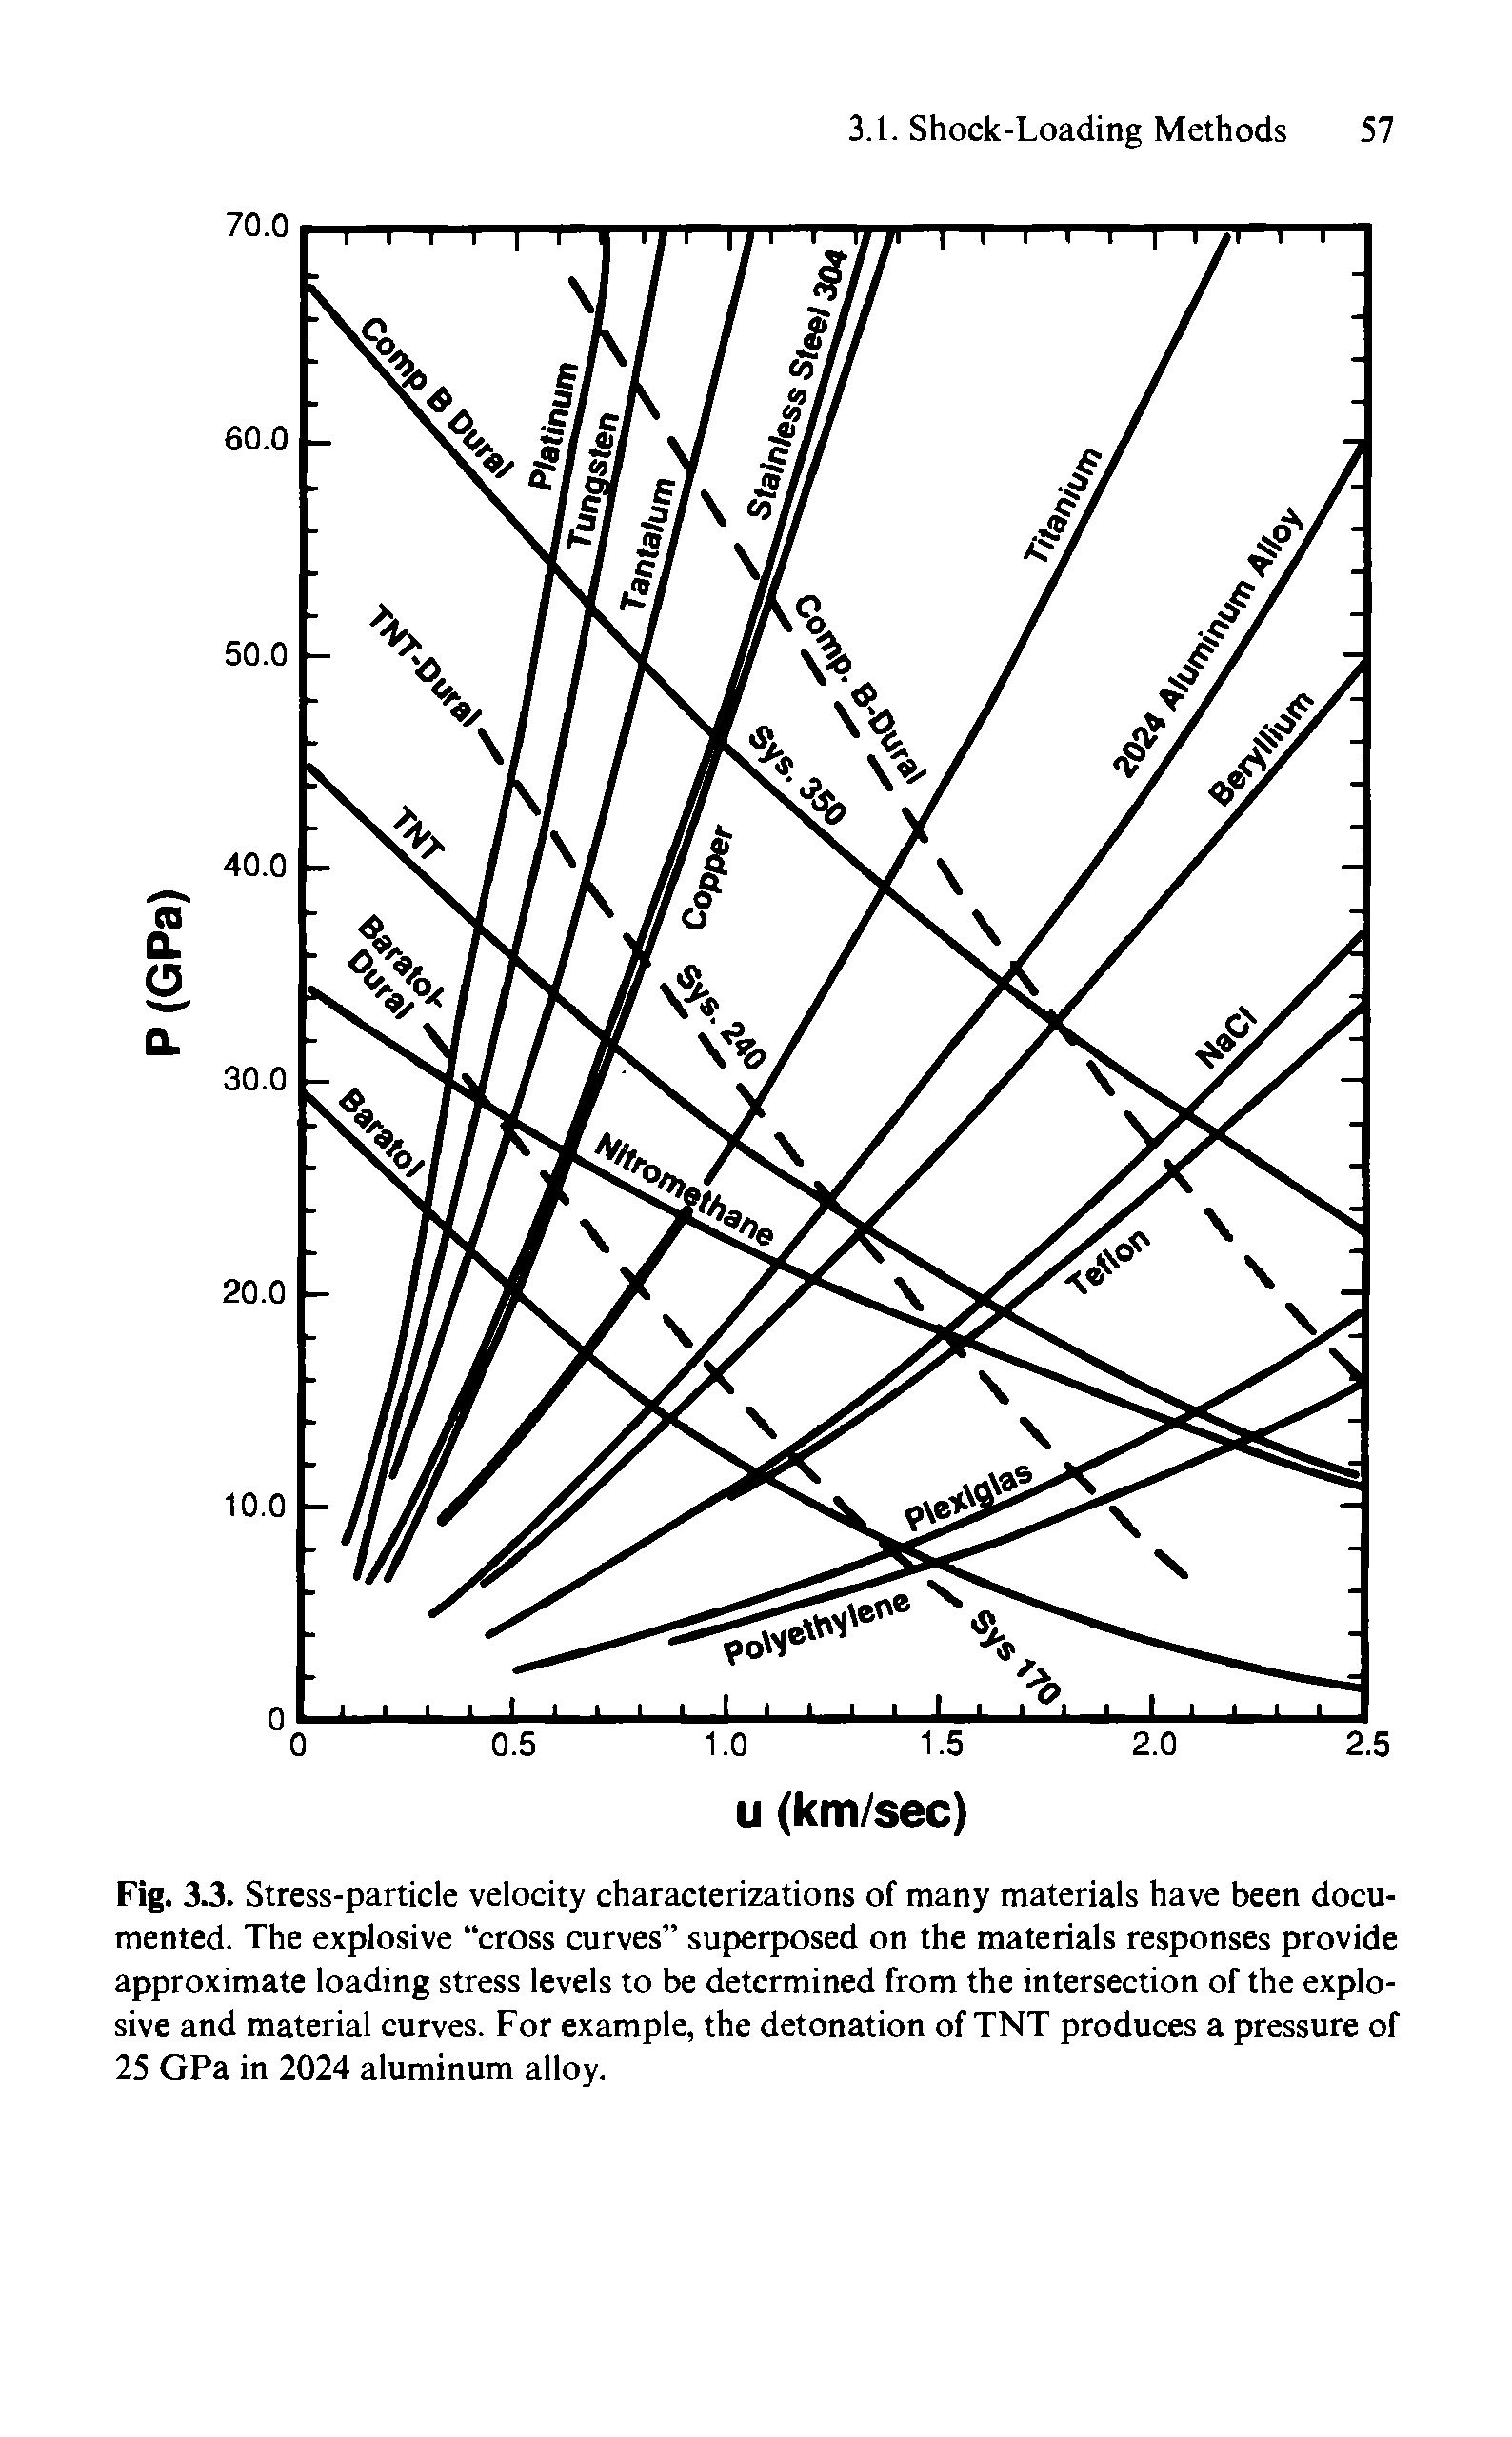 Fig. 3.3. Stress-particle velocity characterizations of many materials have been documented. The explosive cross curves superposed on the materials responses provide approximate loading stress levels to be determined from the intersection of the explosive and material curves. For example, the detonation of TNT produces a pressure of 25 GPa in 2024 aluminum alloy.